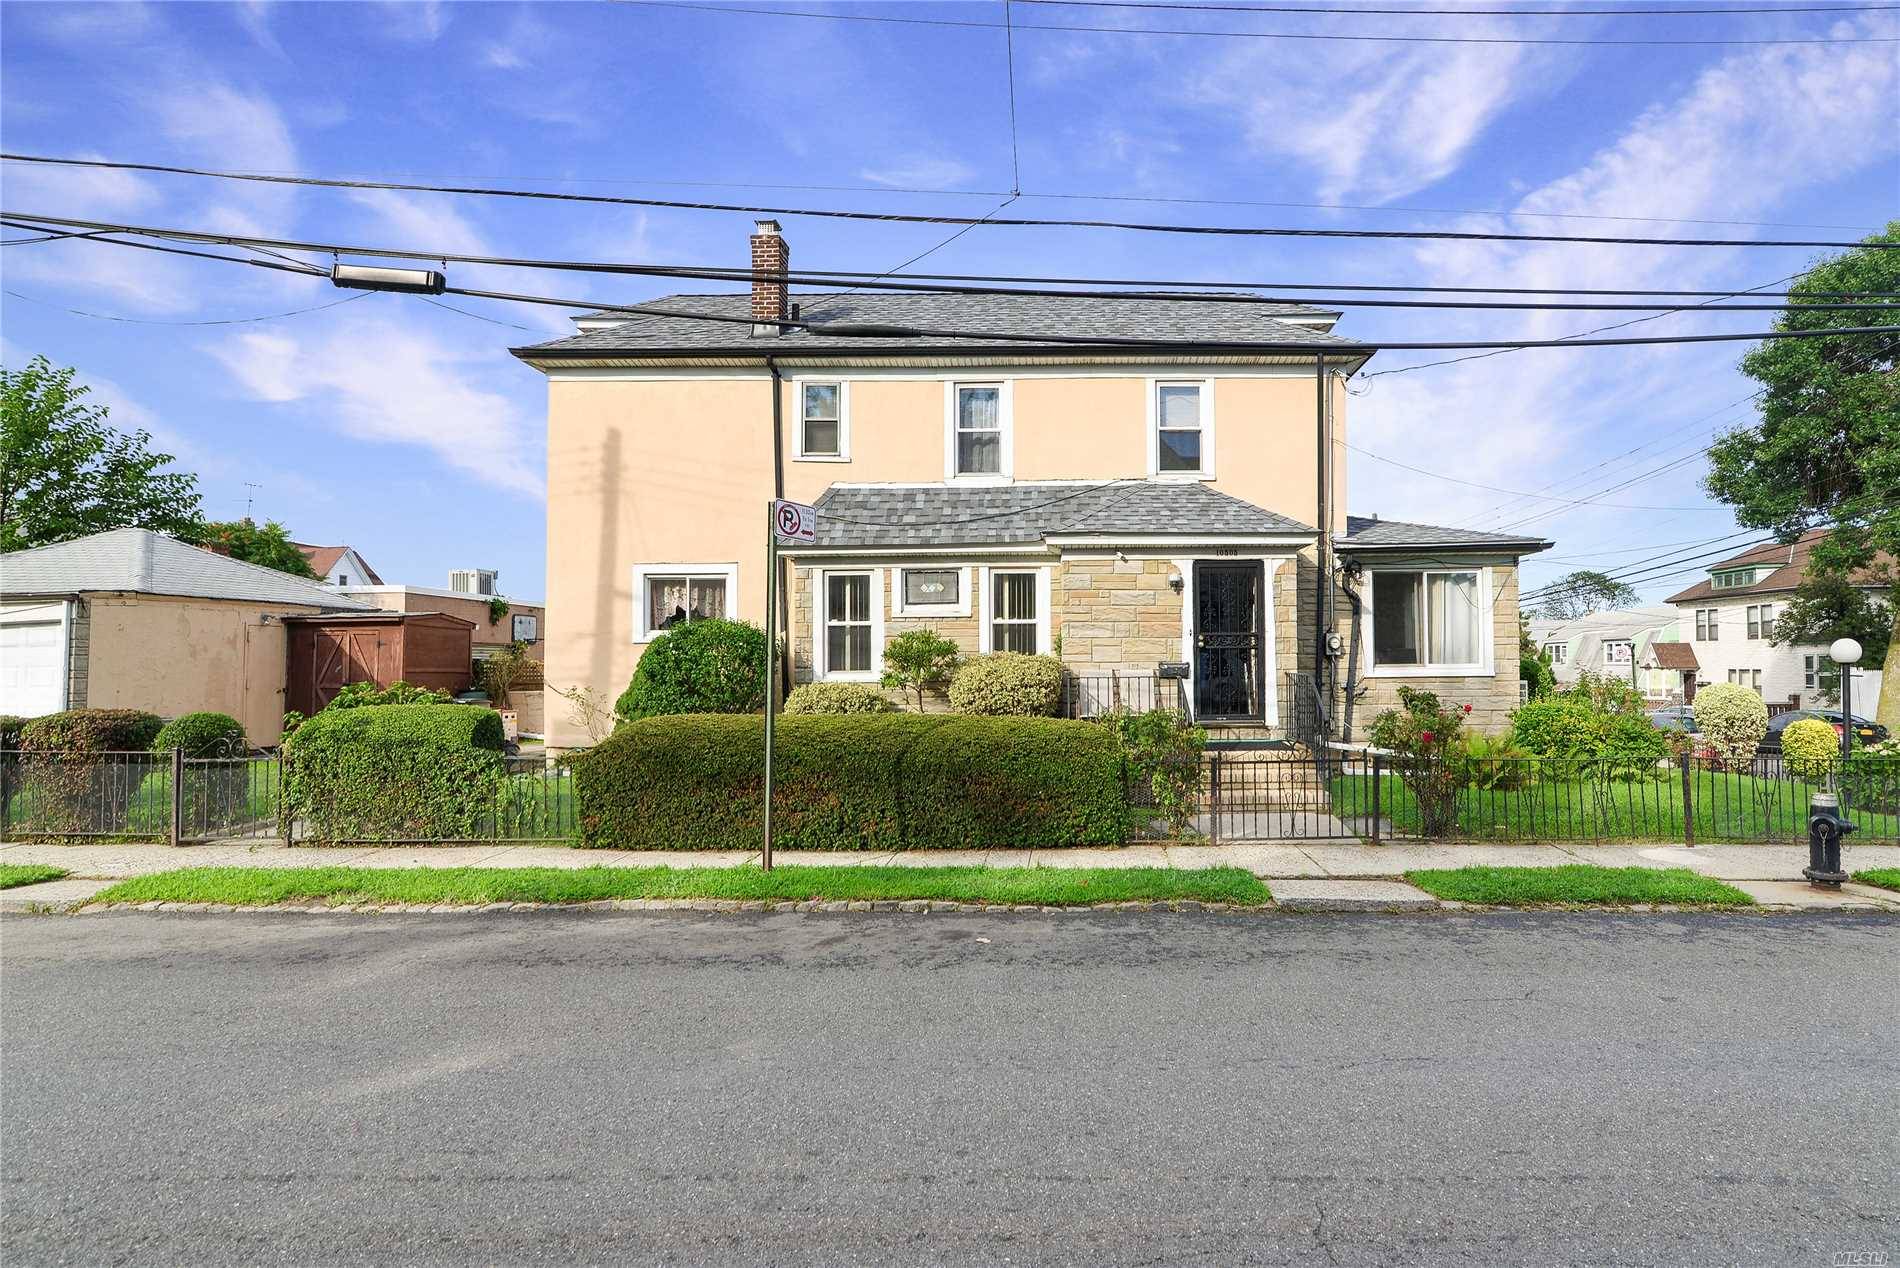 Corner Property Featuring Living Room, Formal Dining Room, Eat In Kitchen, 3 Bedrooms, Full Bath, Full Finished Basement With Separate Entrance.